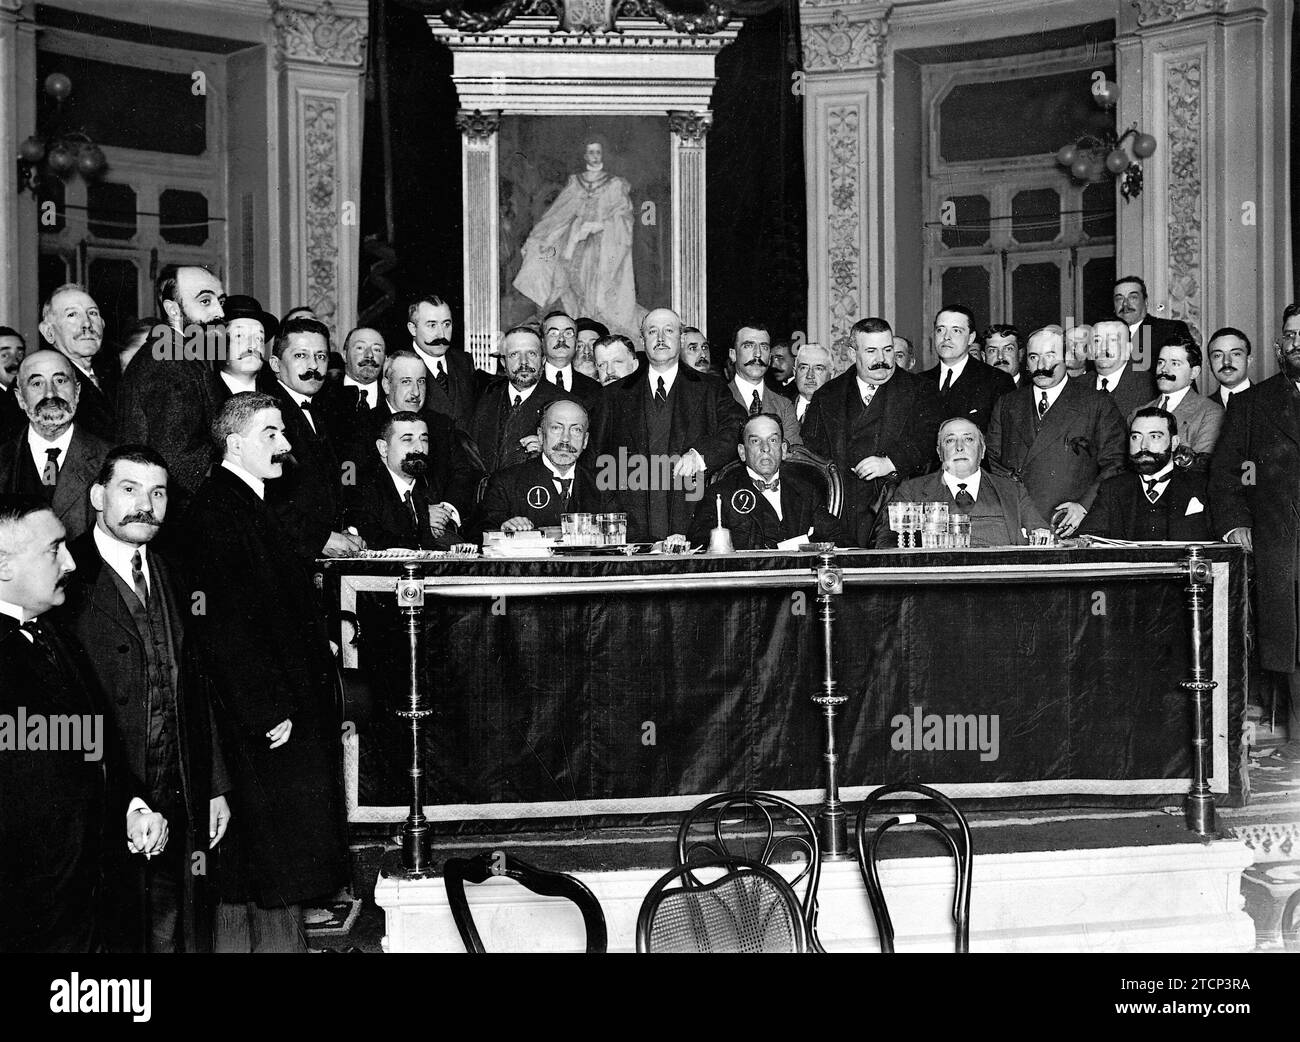 Madrid, 11/14/1913. The Chamber of Urban Property of Madrid. Messrs. Conde de Peñalver (1) and García Molinas (2), in the presidency of the meeting held at the Bank of Spain to protest against the sewer tax. Credit: Album / Archivo ABC / José Zegri Stock Photo